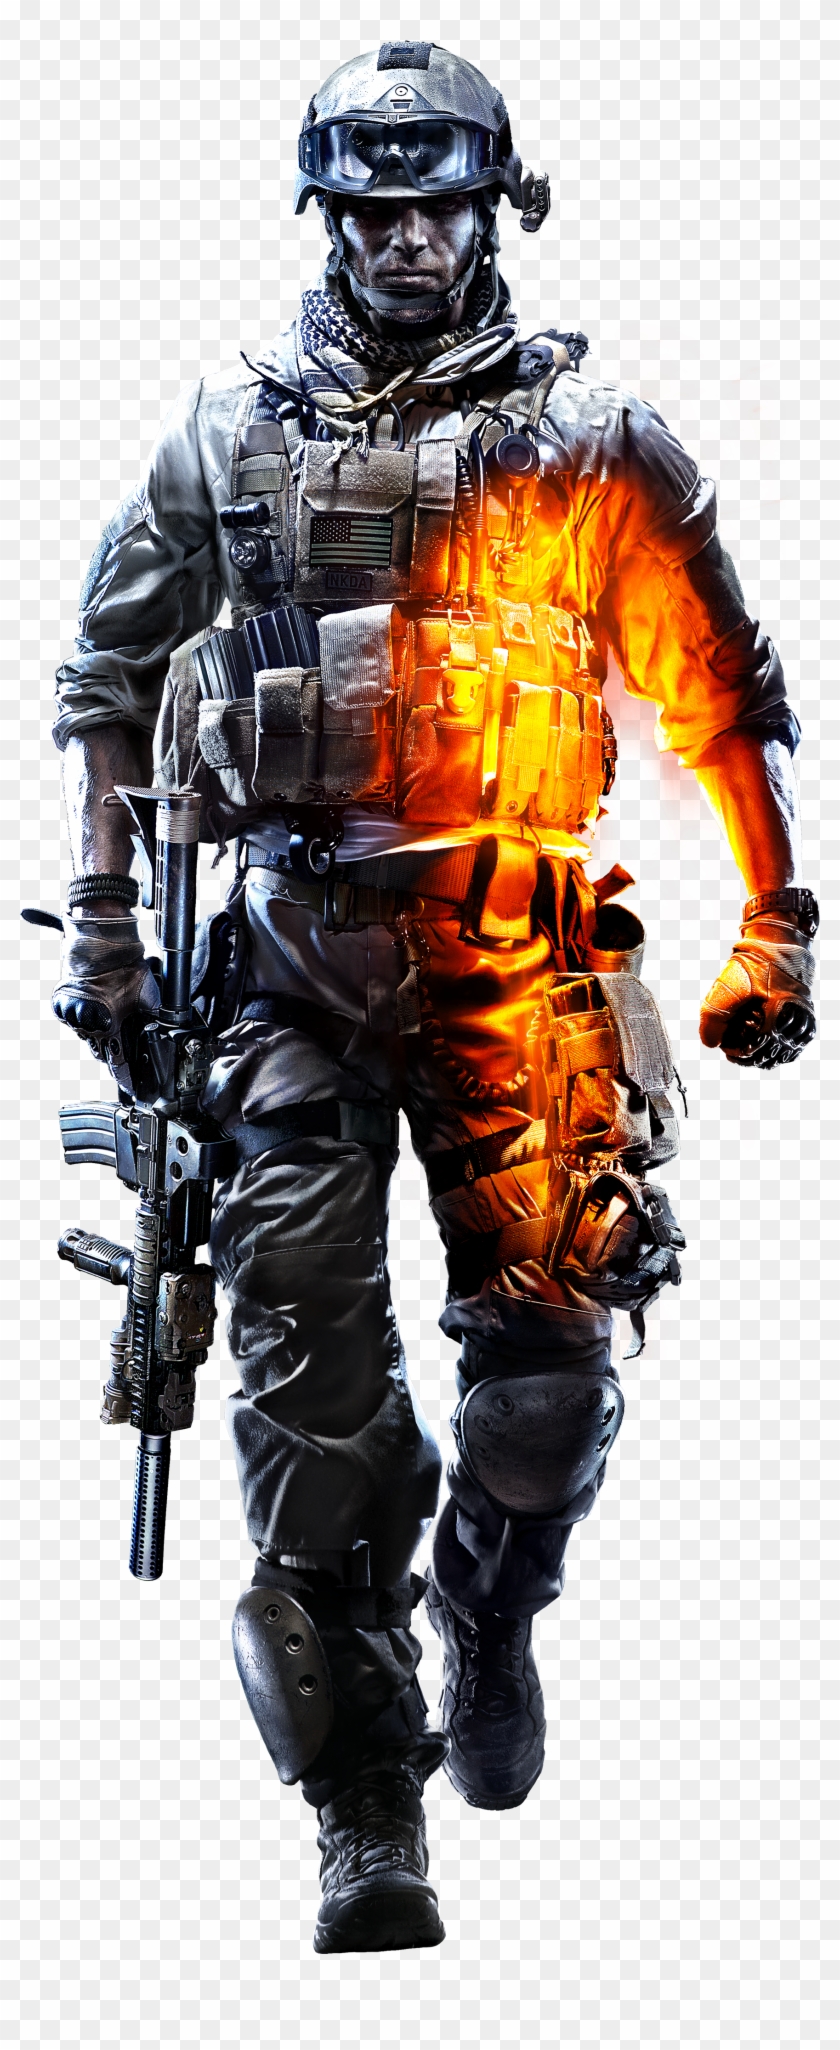 Image Promotional Bf - Battlefield 3 Soldier Png Clipart #2661998